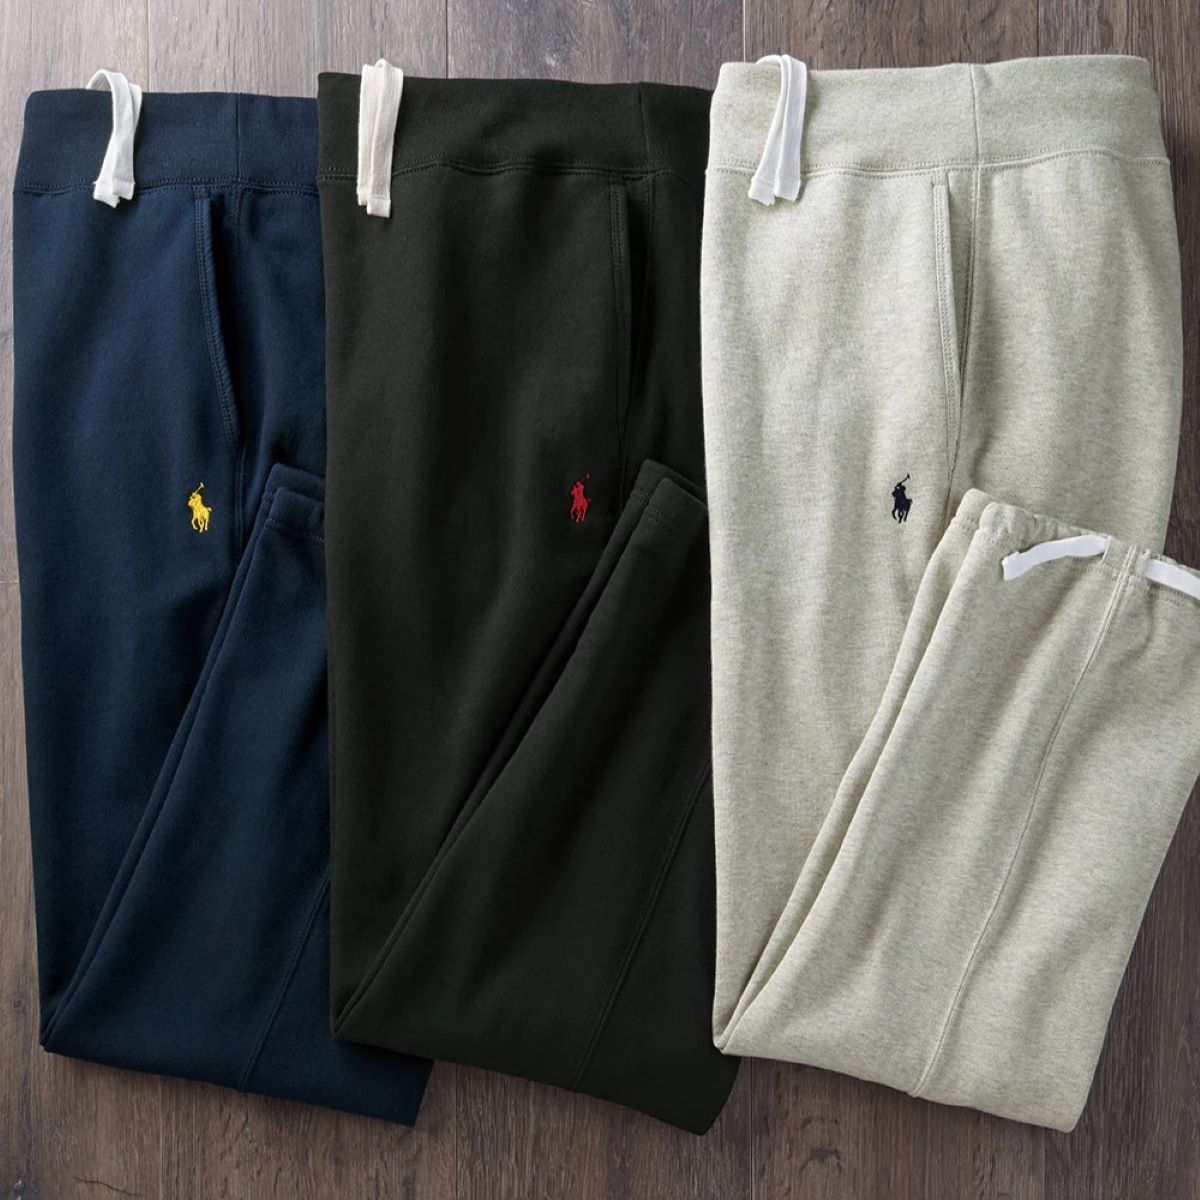 How To Store Sweatpants